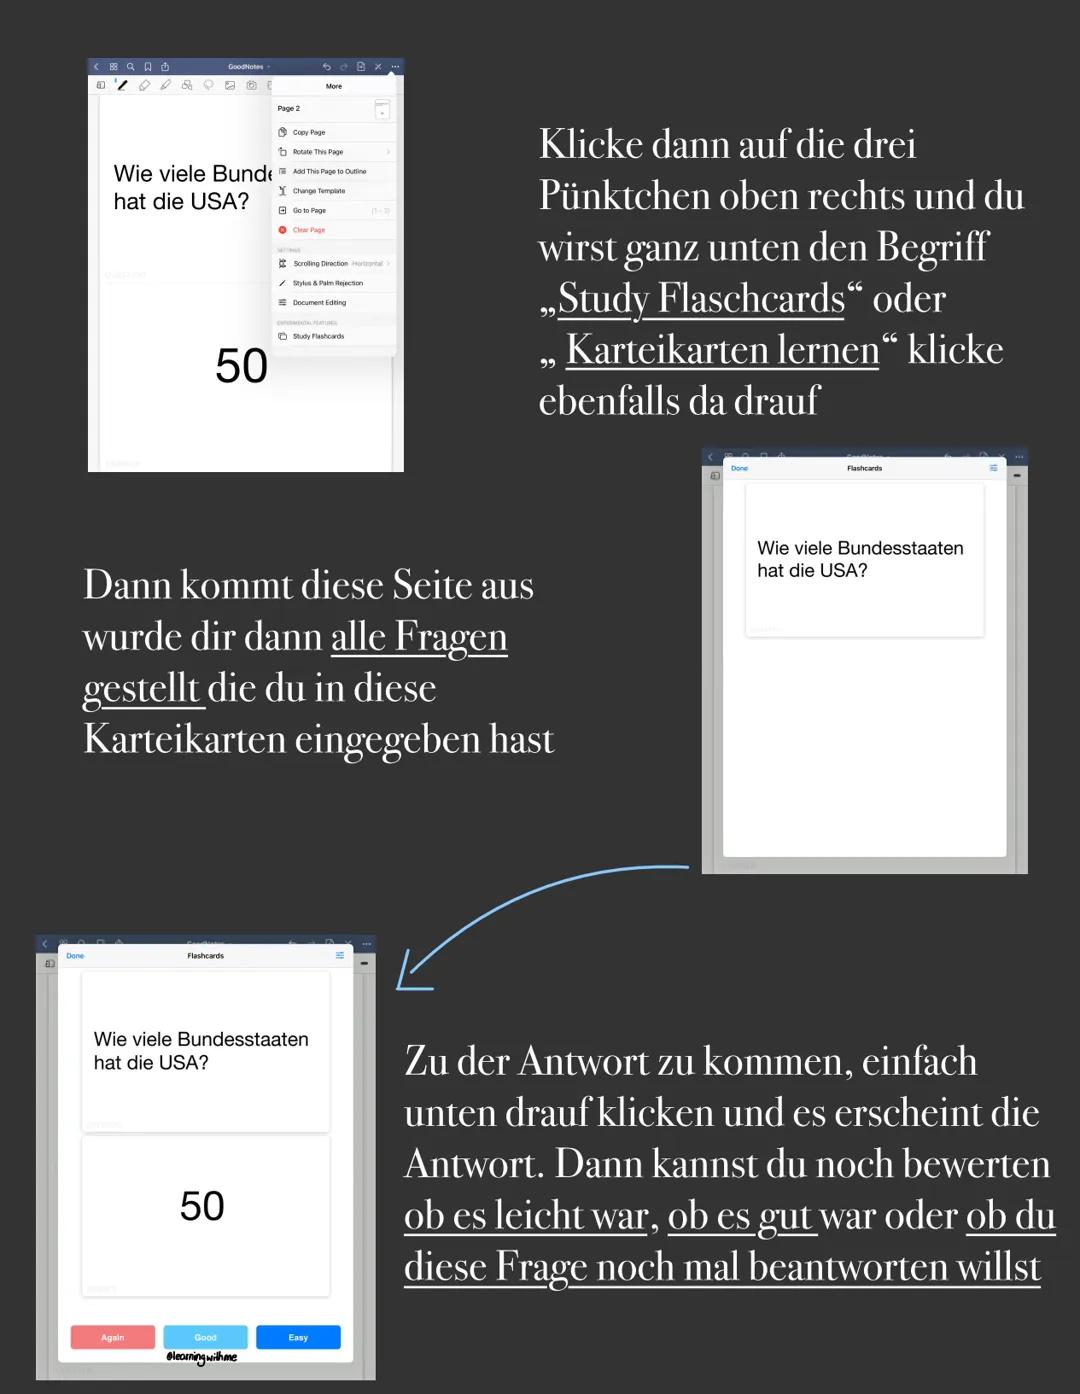 67
1 O 6
< 88 ano
6/ 8
GoodNotes
Q
Karteikarten bei GoodNotes
GoodNotes
Page 2
Copy Page
Rotate This Page
O 13
50
Add This Page to Outline
C